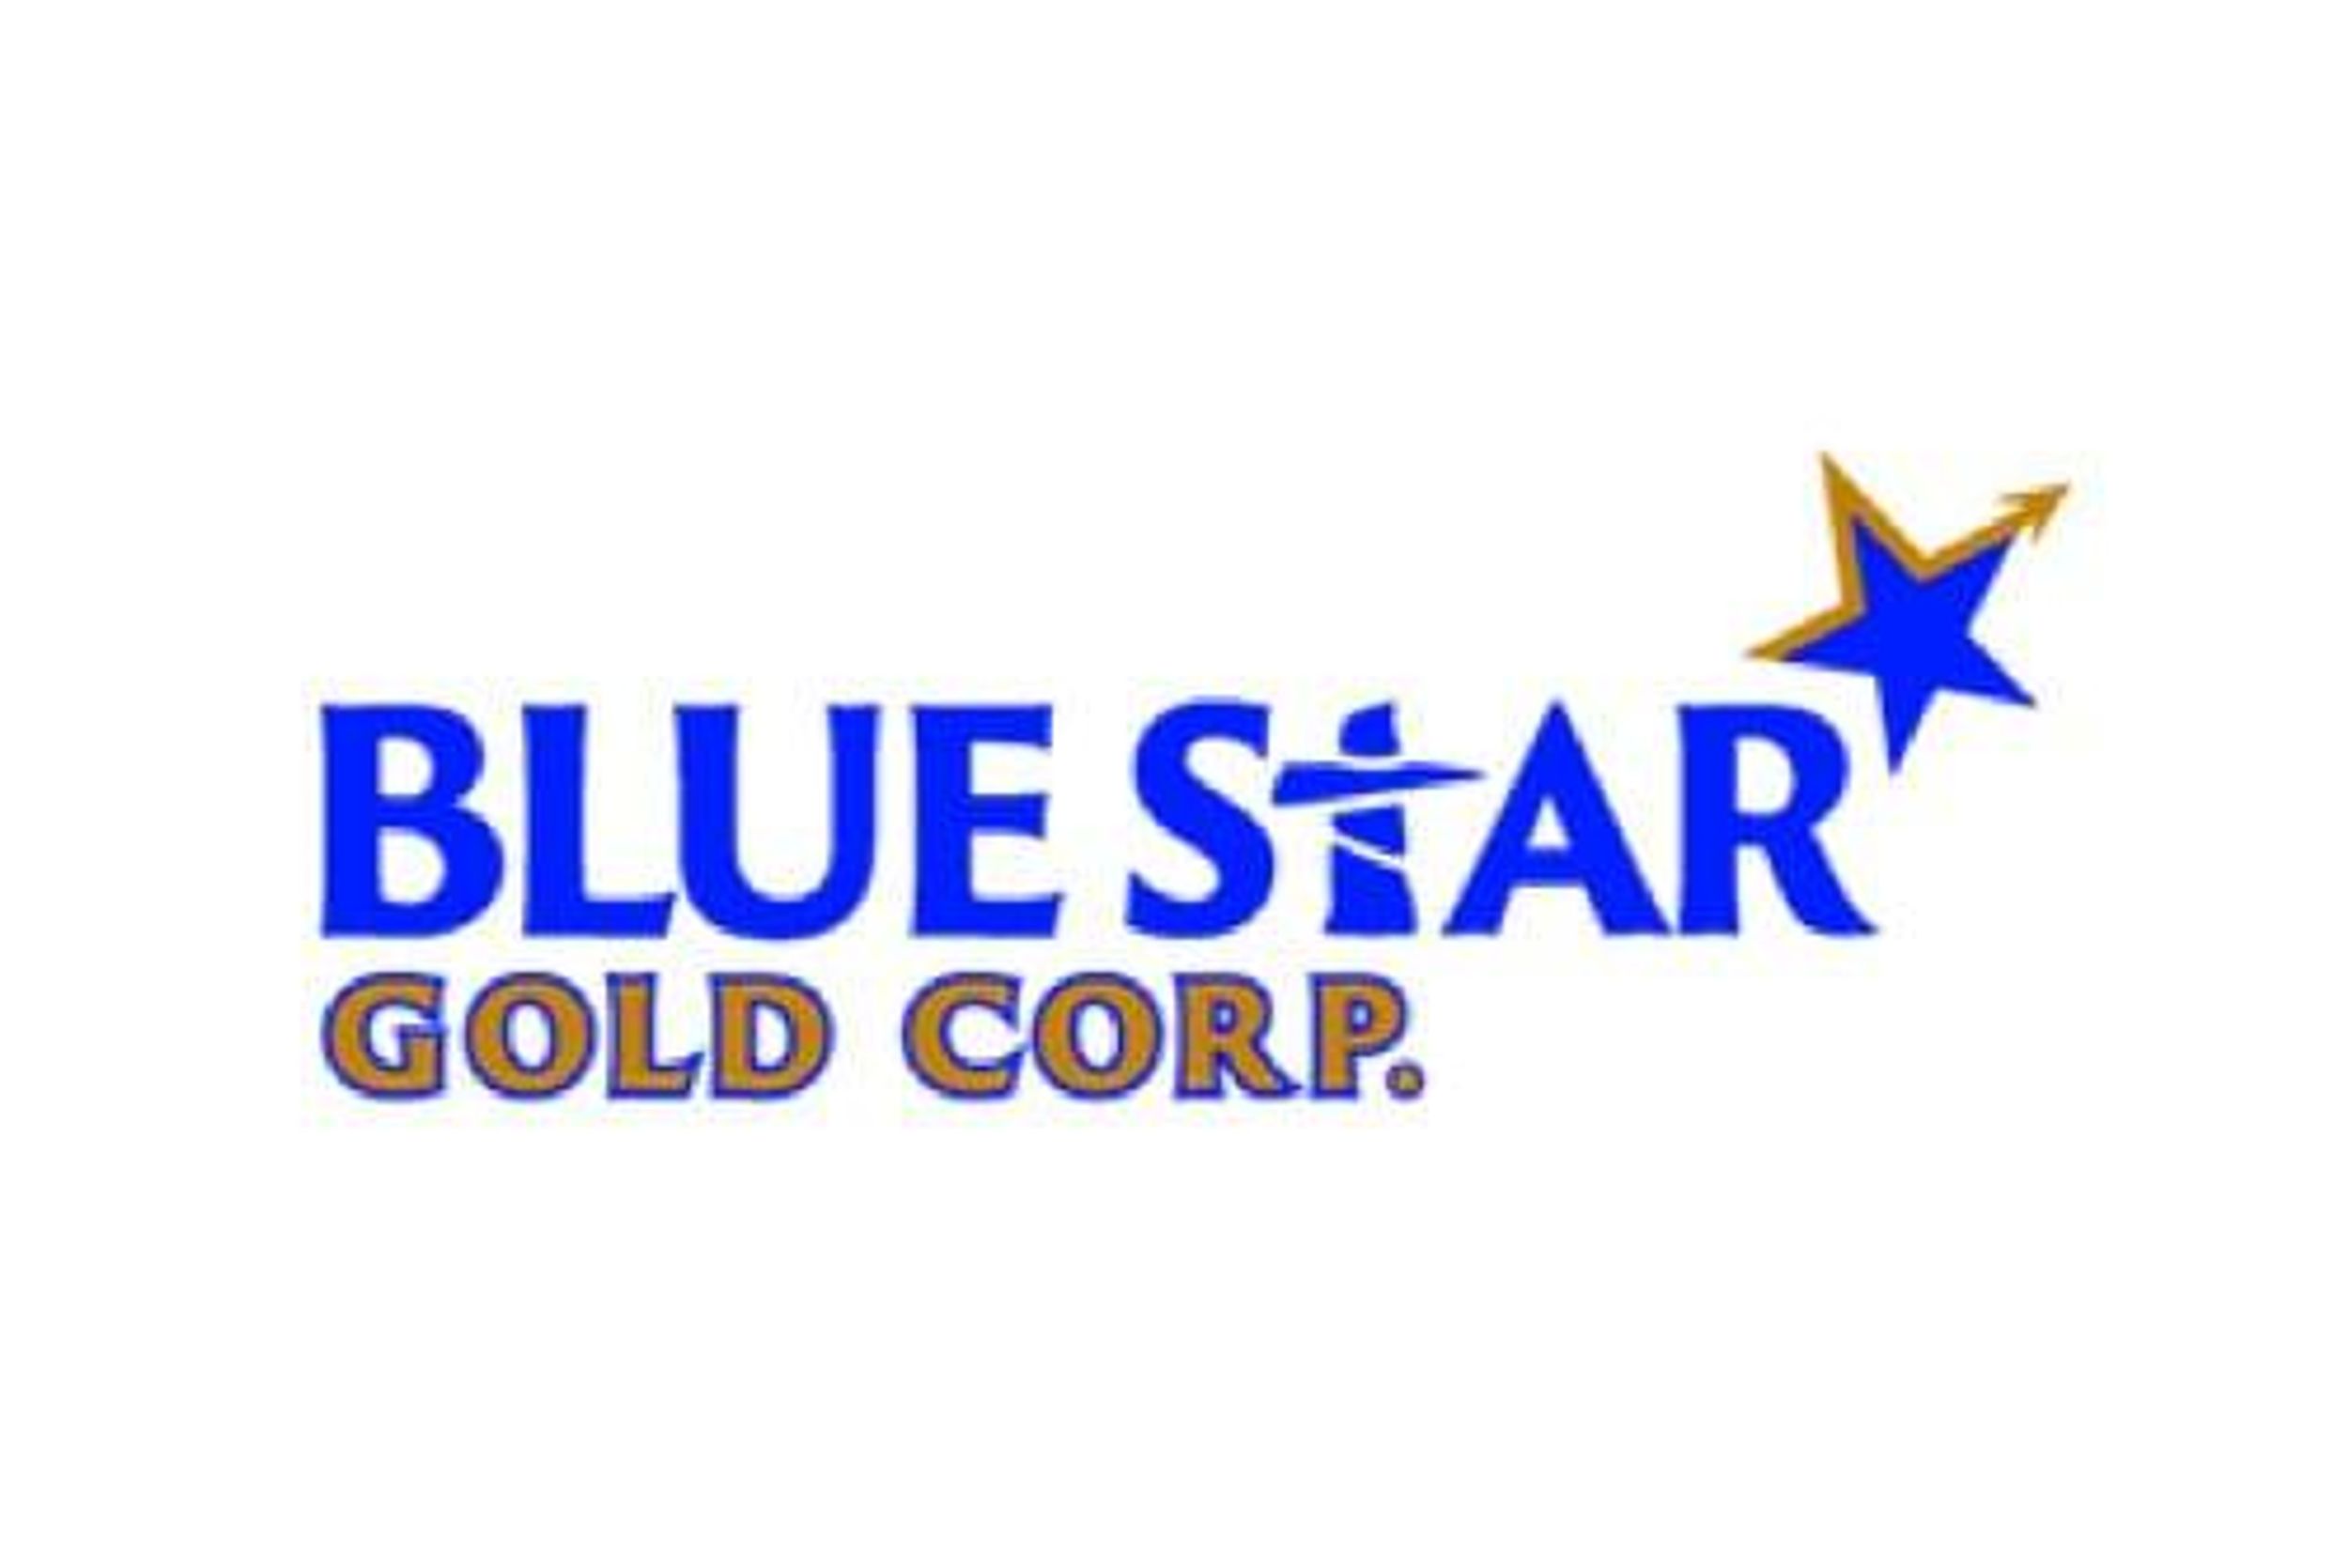 Blue Star Gold Drills 5.21 g/t Gold over 3.00 Metres in a Structure Parallel to Its High-Grade Flood Zone Gold Deposit